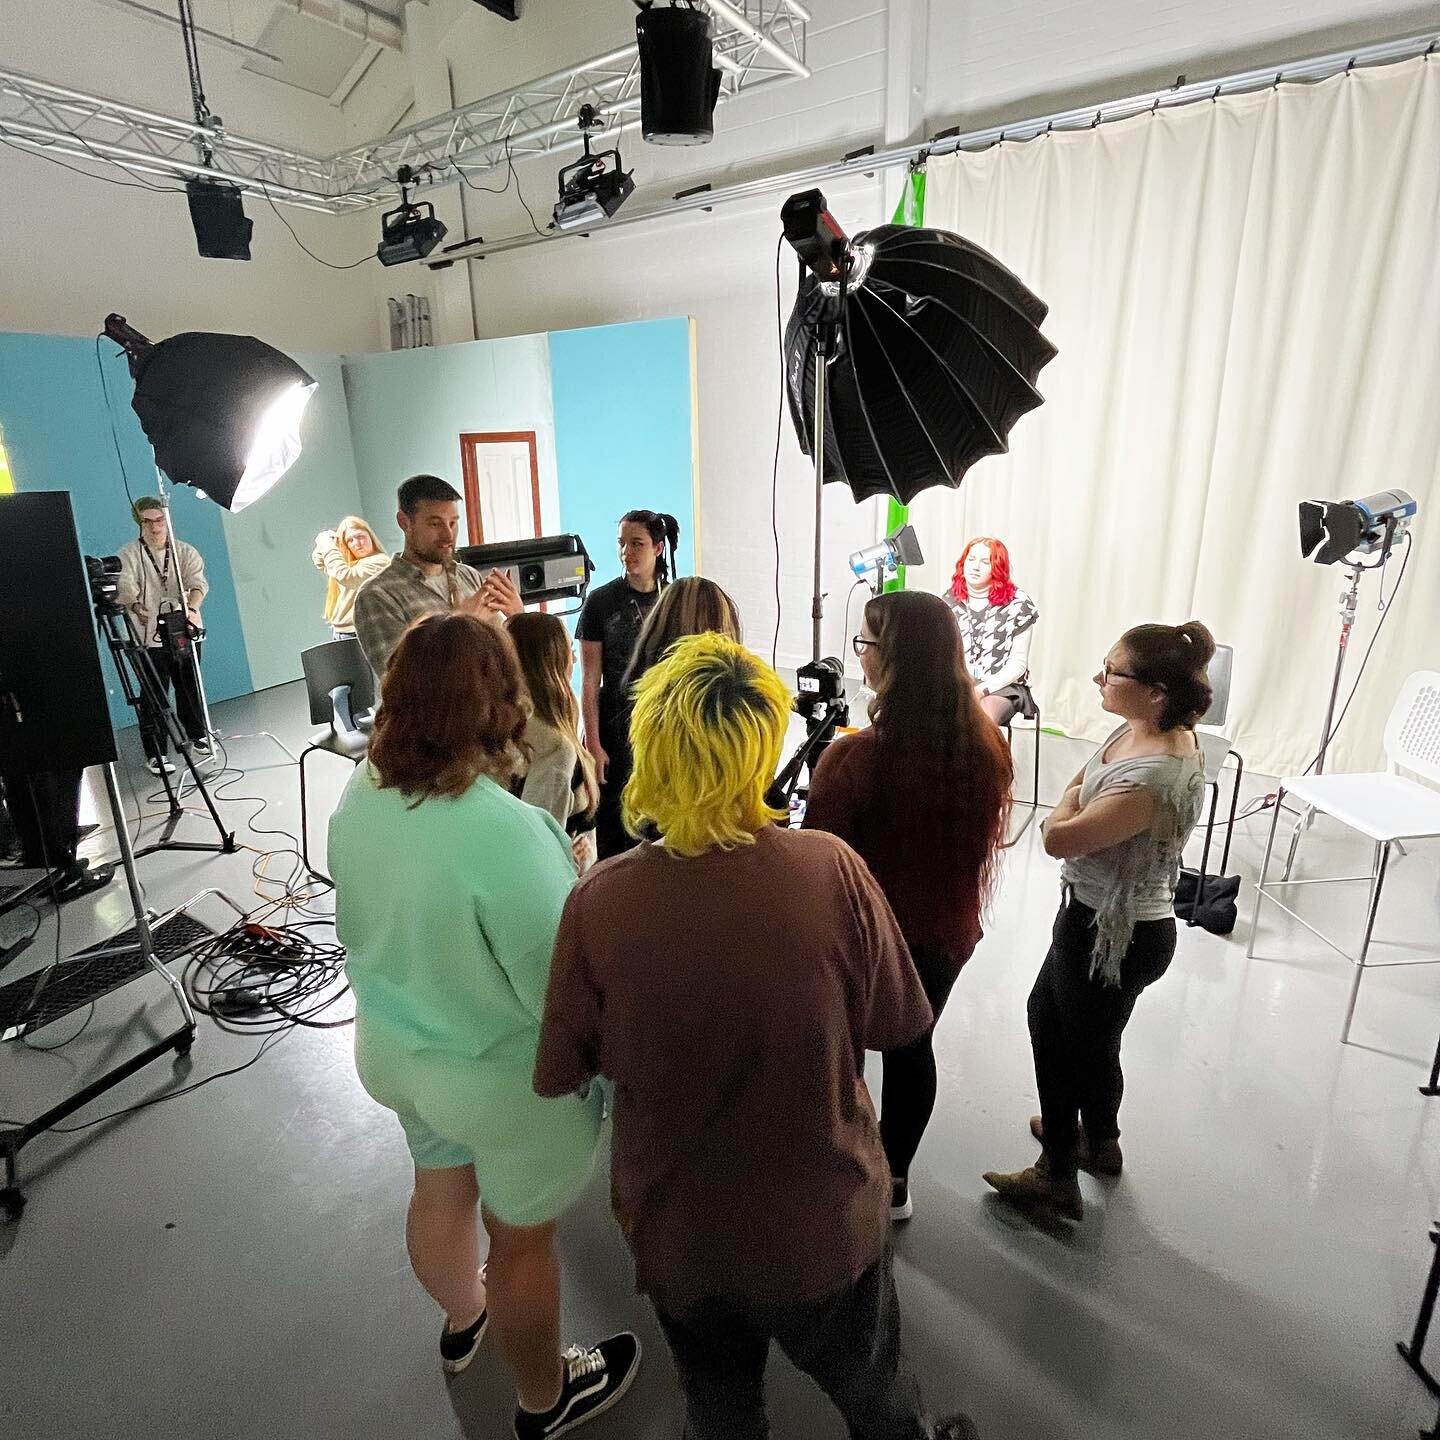 Recently been teaching #photography with Brighton @screenfilmsch 

This workshop offers essential guidance for portrait photography using constant lighting. Highlighting areas of importance that students can apply with limited technical accessibility